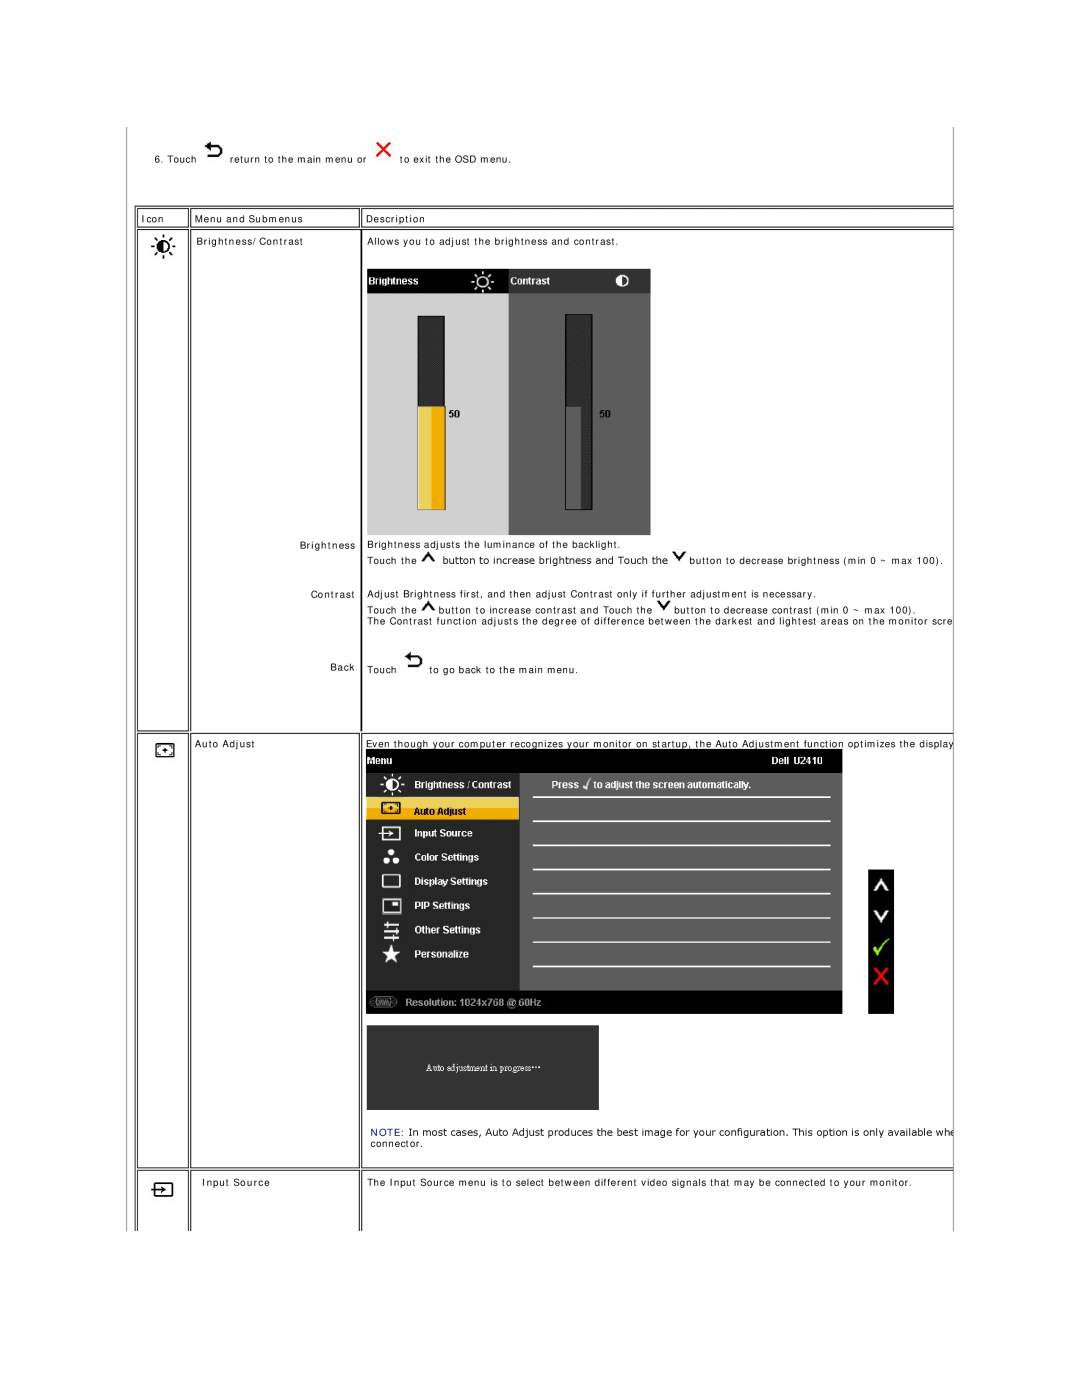 Dell 320-8277 Icon, Menu and Submenus, Description, Brightness/Contrast, Allows you to adjust the brightness and contrast 